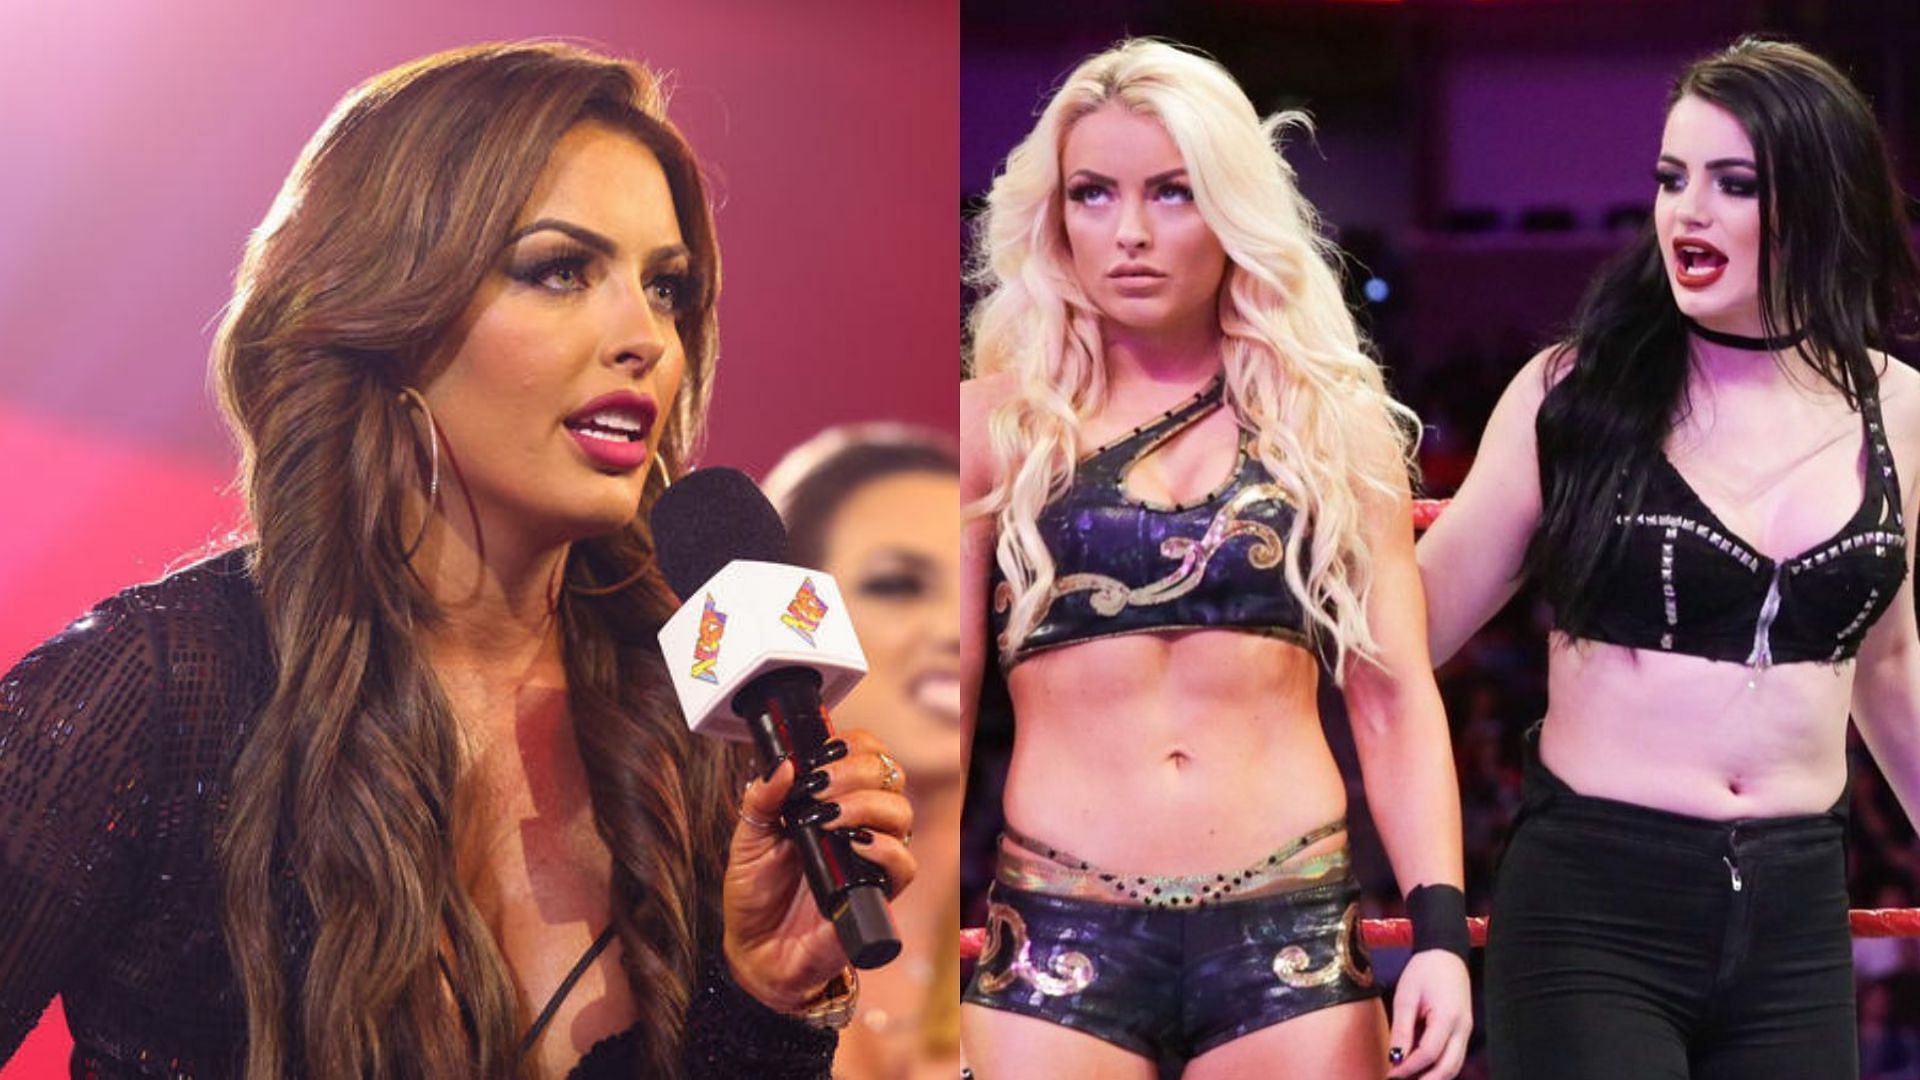 Mandy Rose was part of Absolution with Paige and Sonya Deville